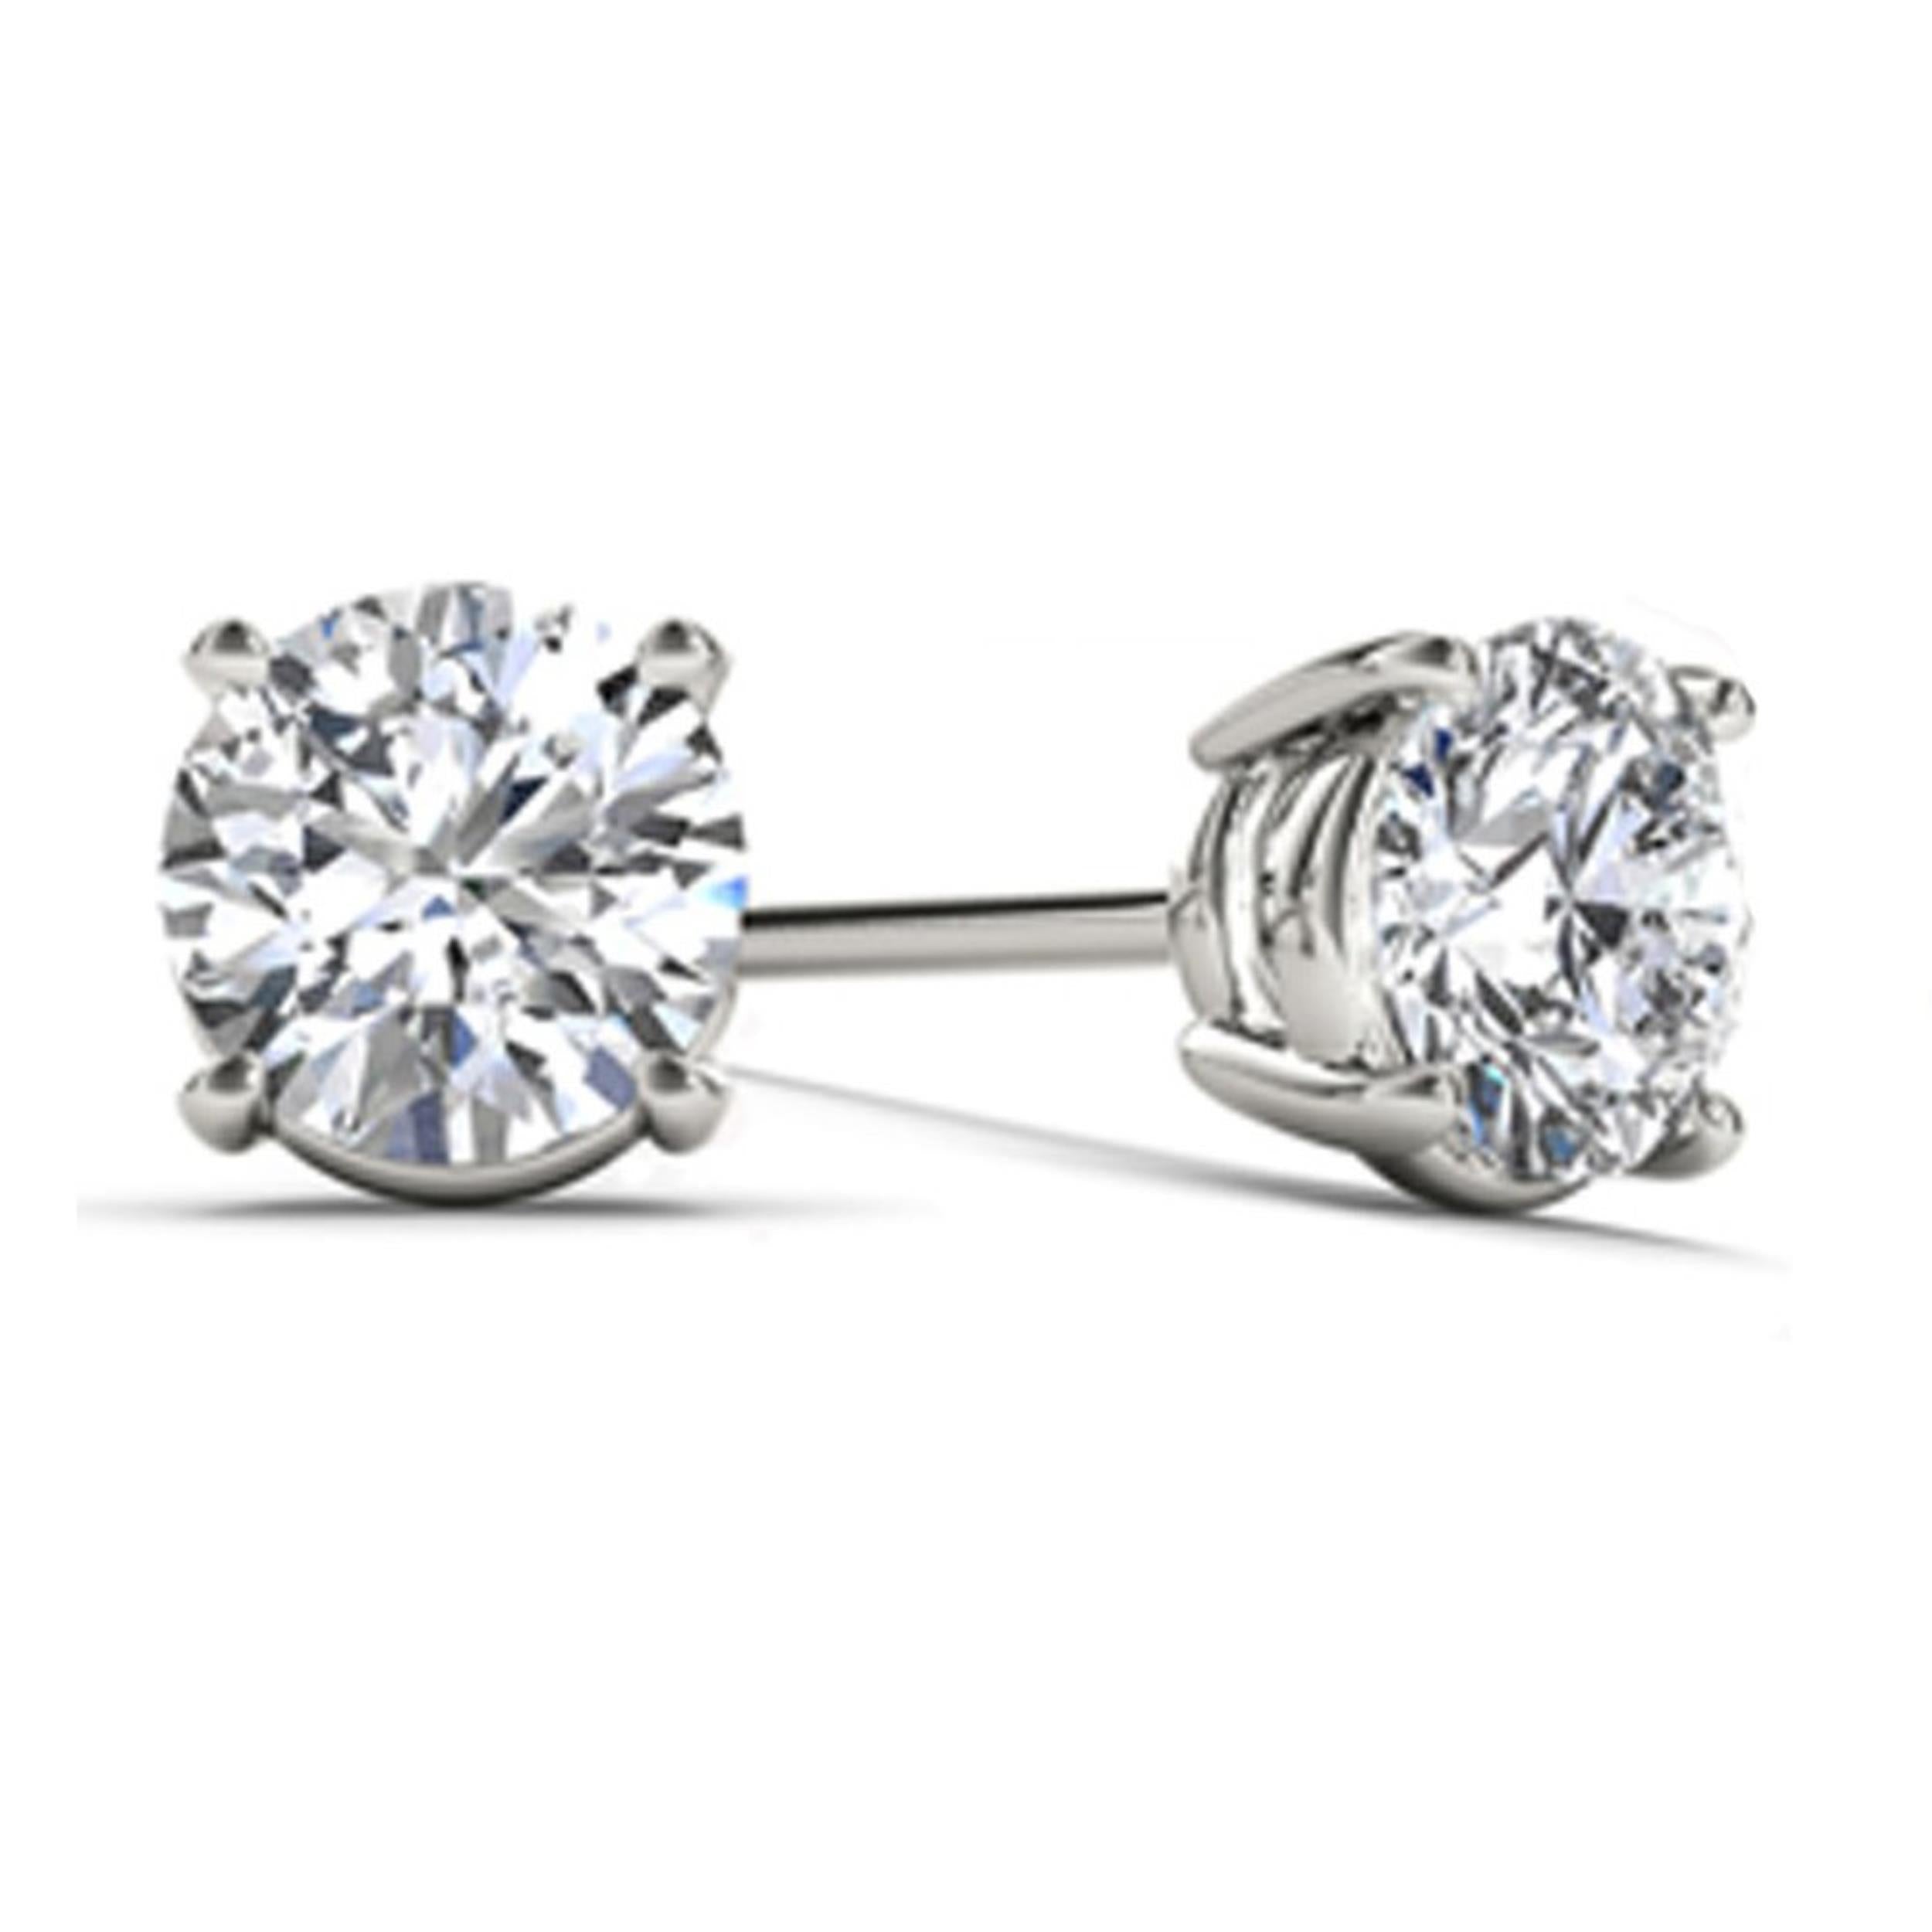 14Kt White Gold 0.62 Ct Genuine Natural Diamond Round Stud Earrings